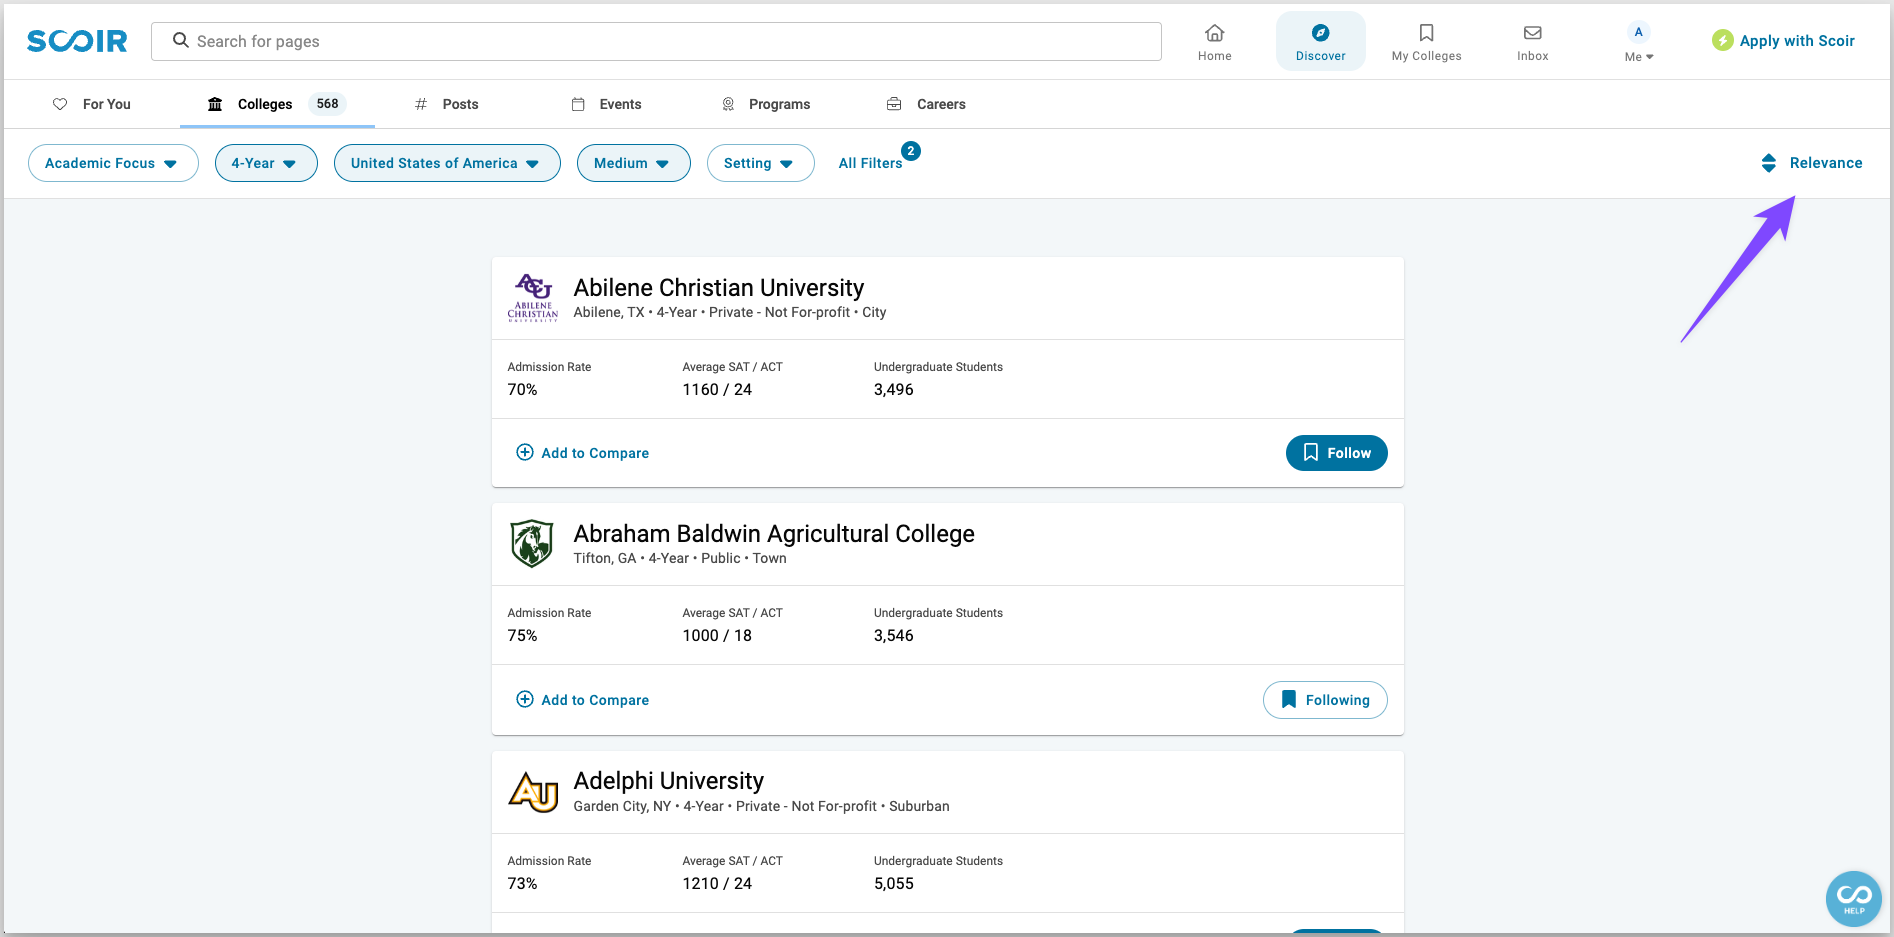 For Students: Discover Colleges - sort colleges by relevance